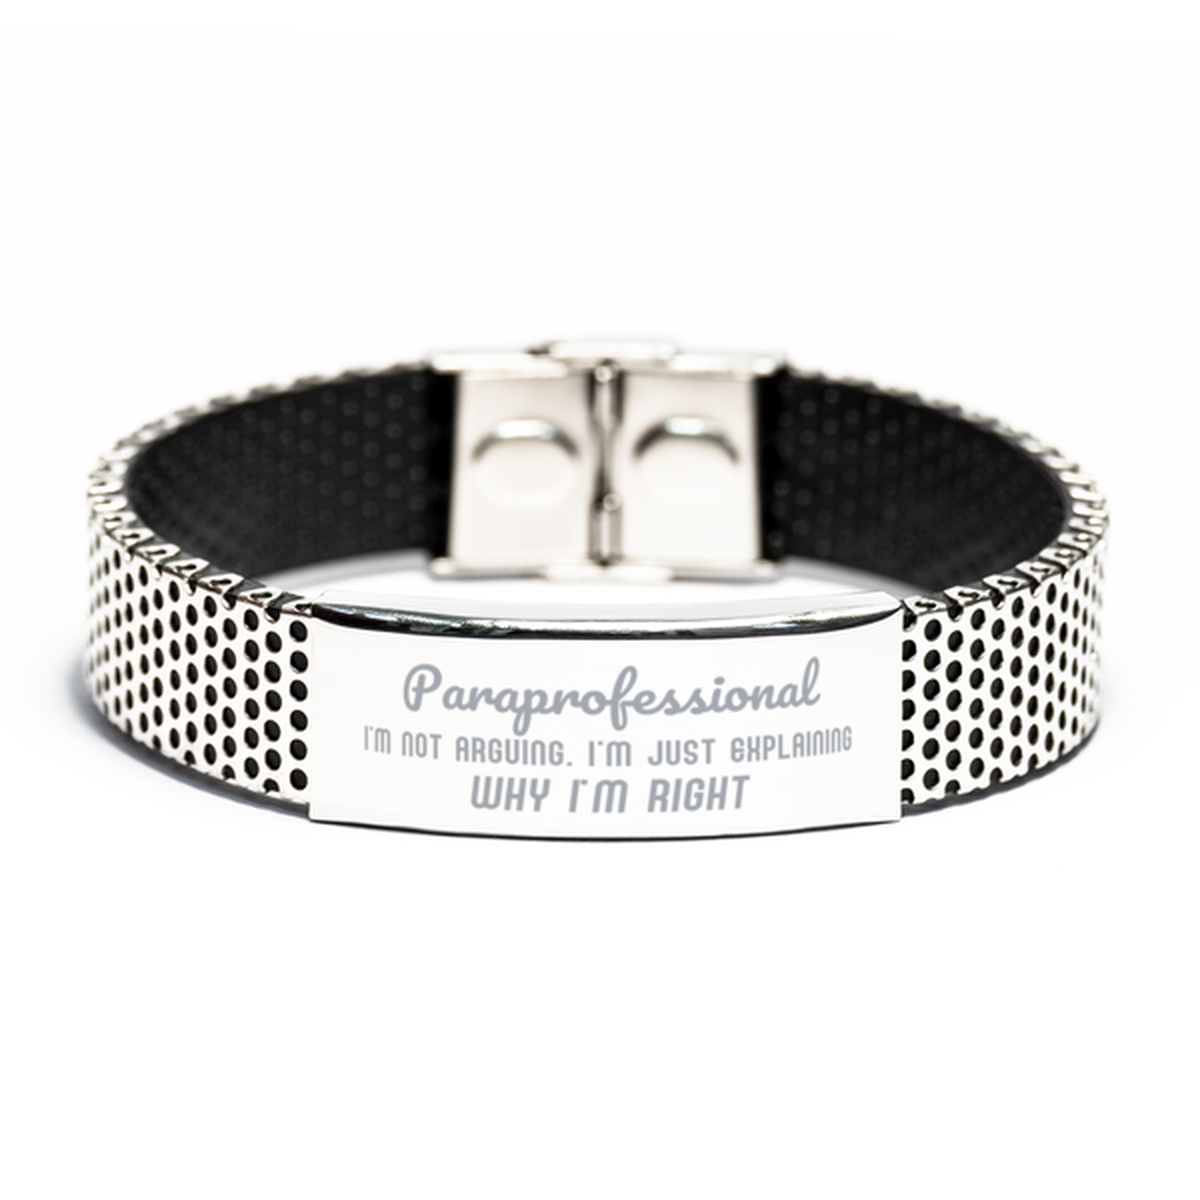 Paraprofessional I'm not Arguing. I'm Just Explaining Why I'm RIGHT Stainless Steel Bracelet, Funny Saying Quote Paraprofessional Gifts For Paraprofessional Graduation Birthday Christmas Gifts for Men Women Coworker